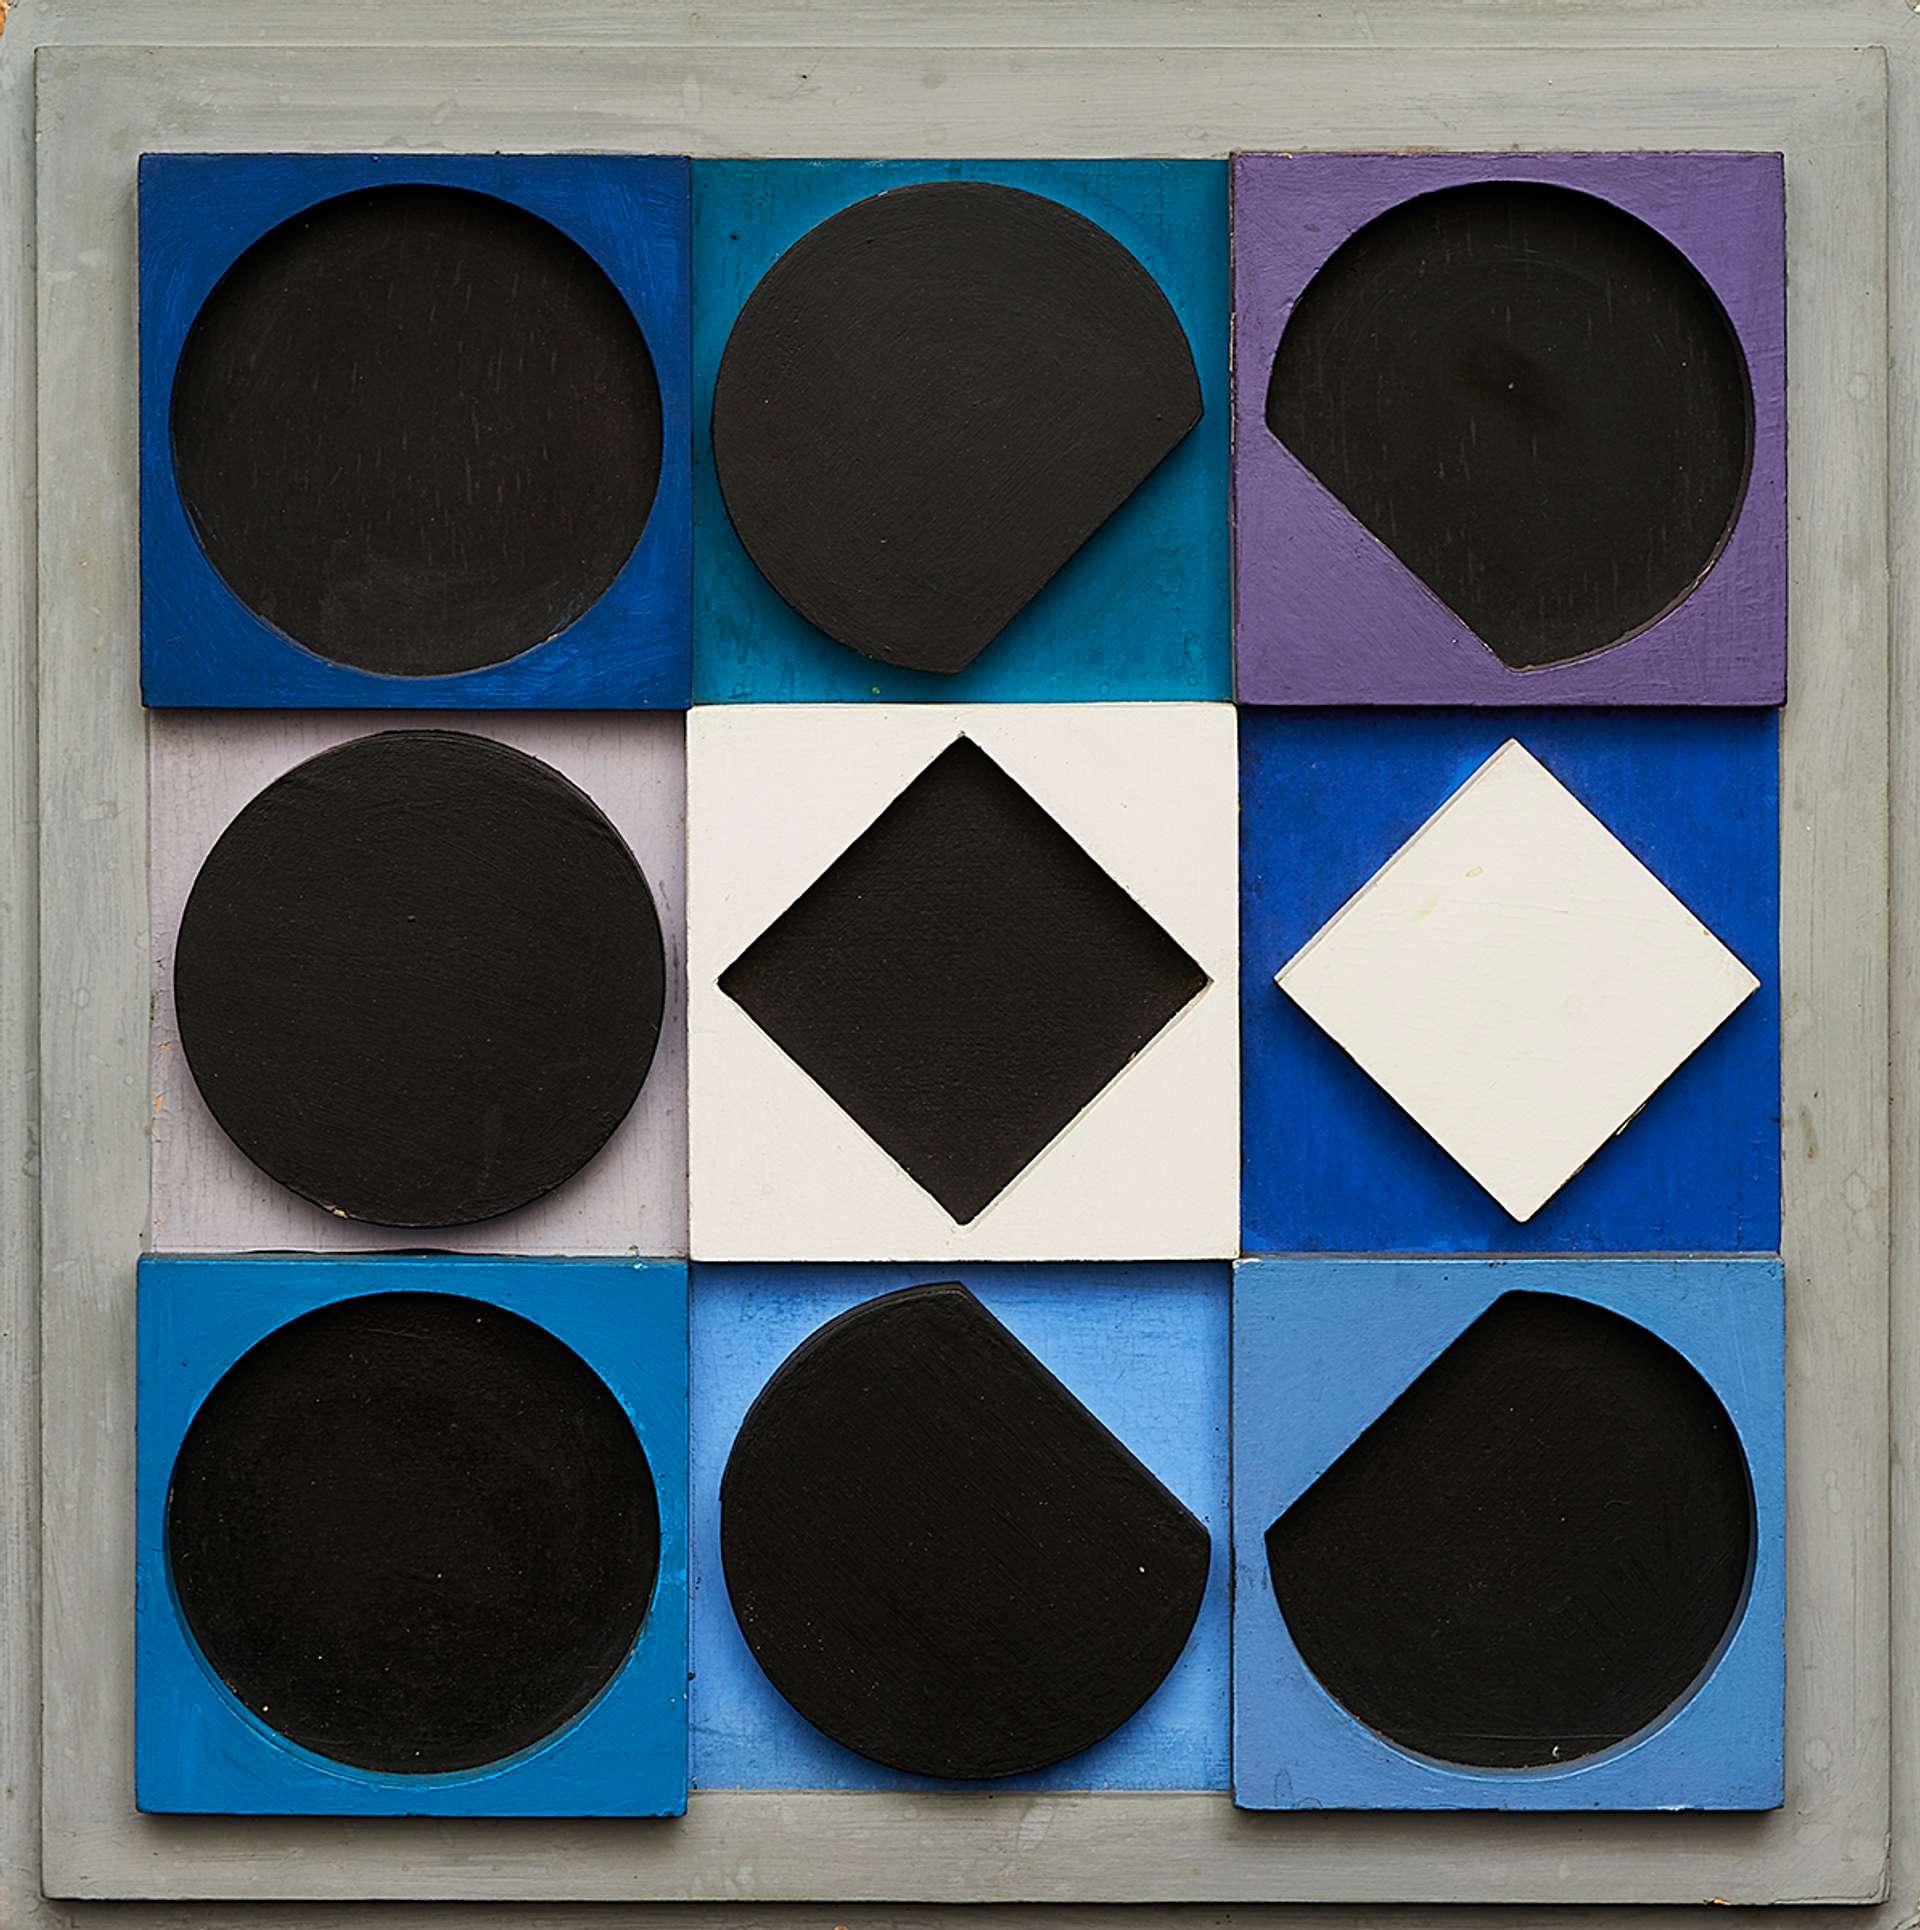 Victor Vasarely (09.04.1906 - 15.03.1997) - Biography, Interesting